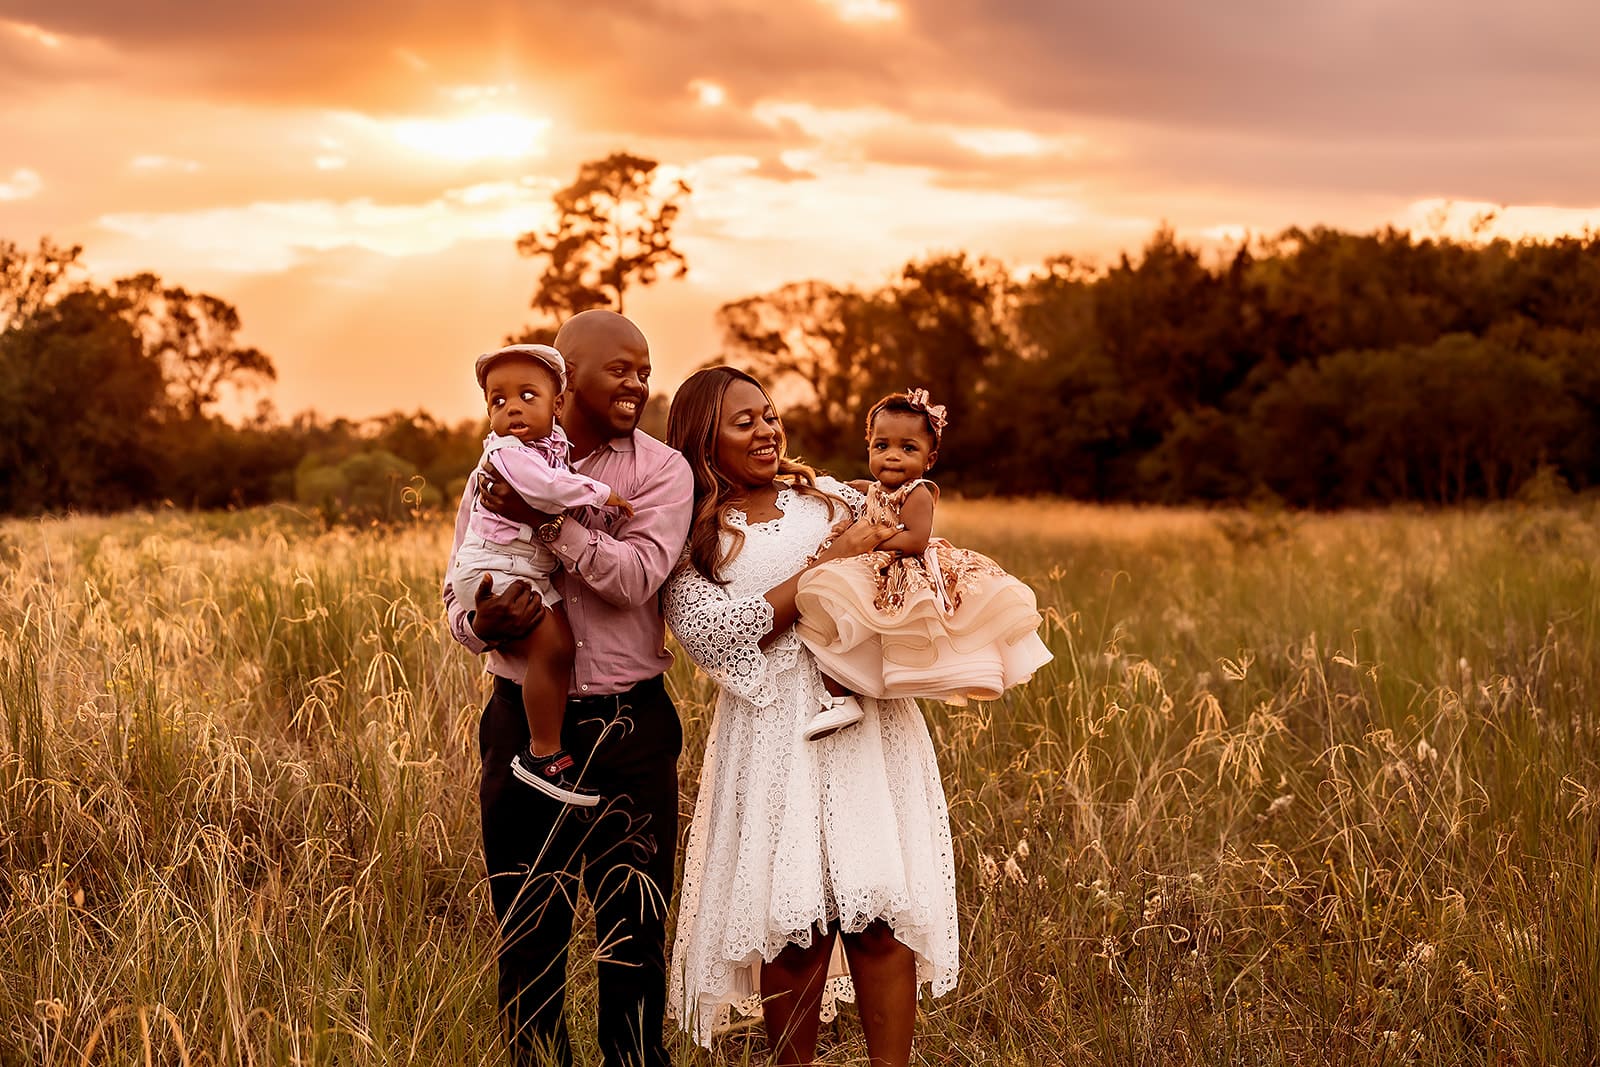 Services | Family Photography Examples | Emily Brunner Photography